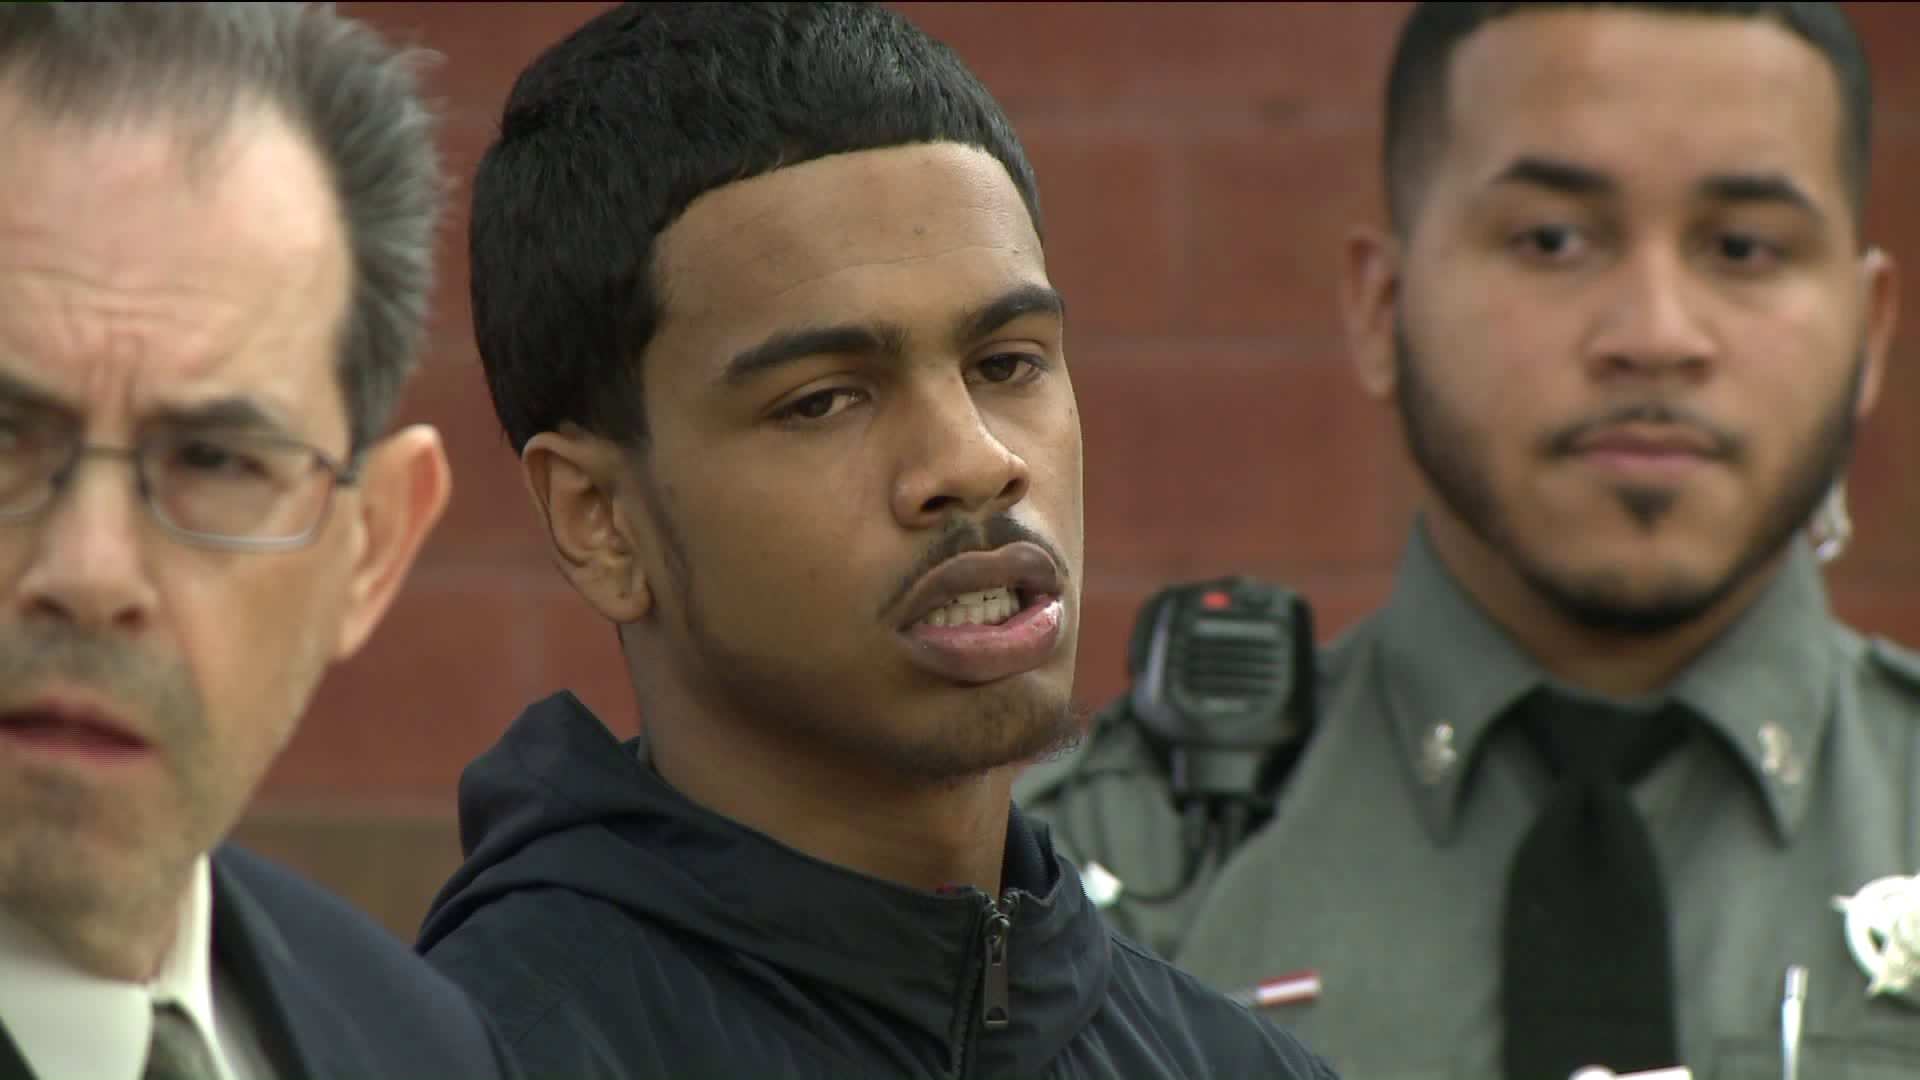 19 year-old pleads not guilty to charges in Hartford stolen vehicle case